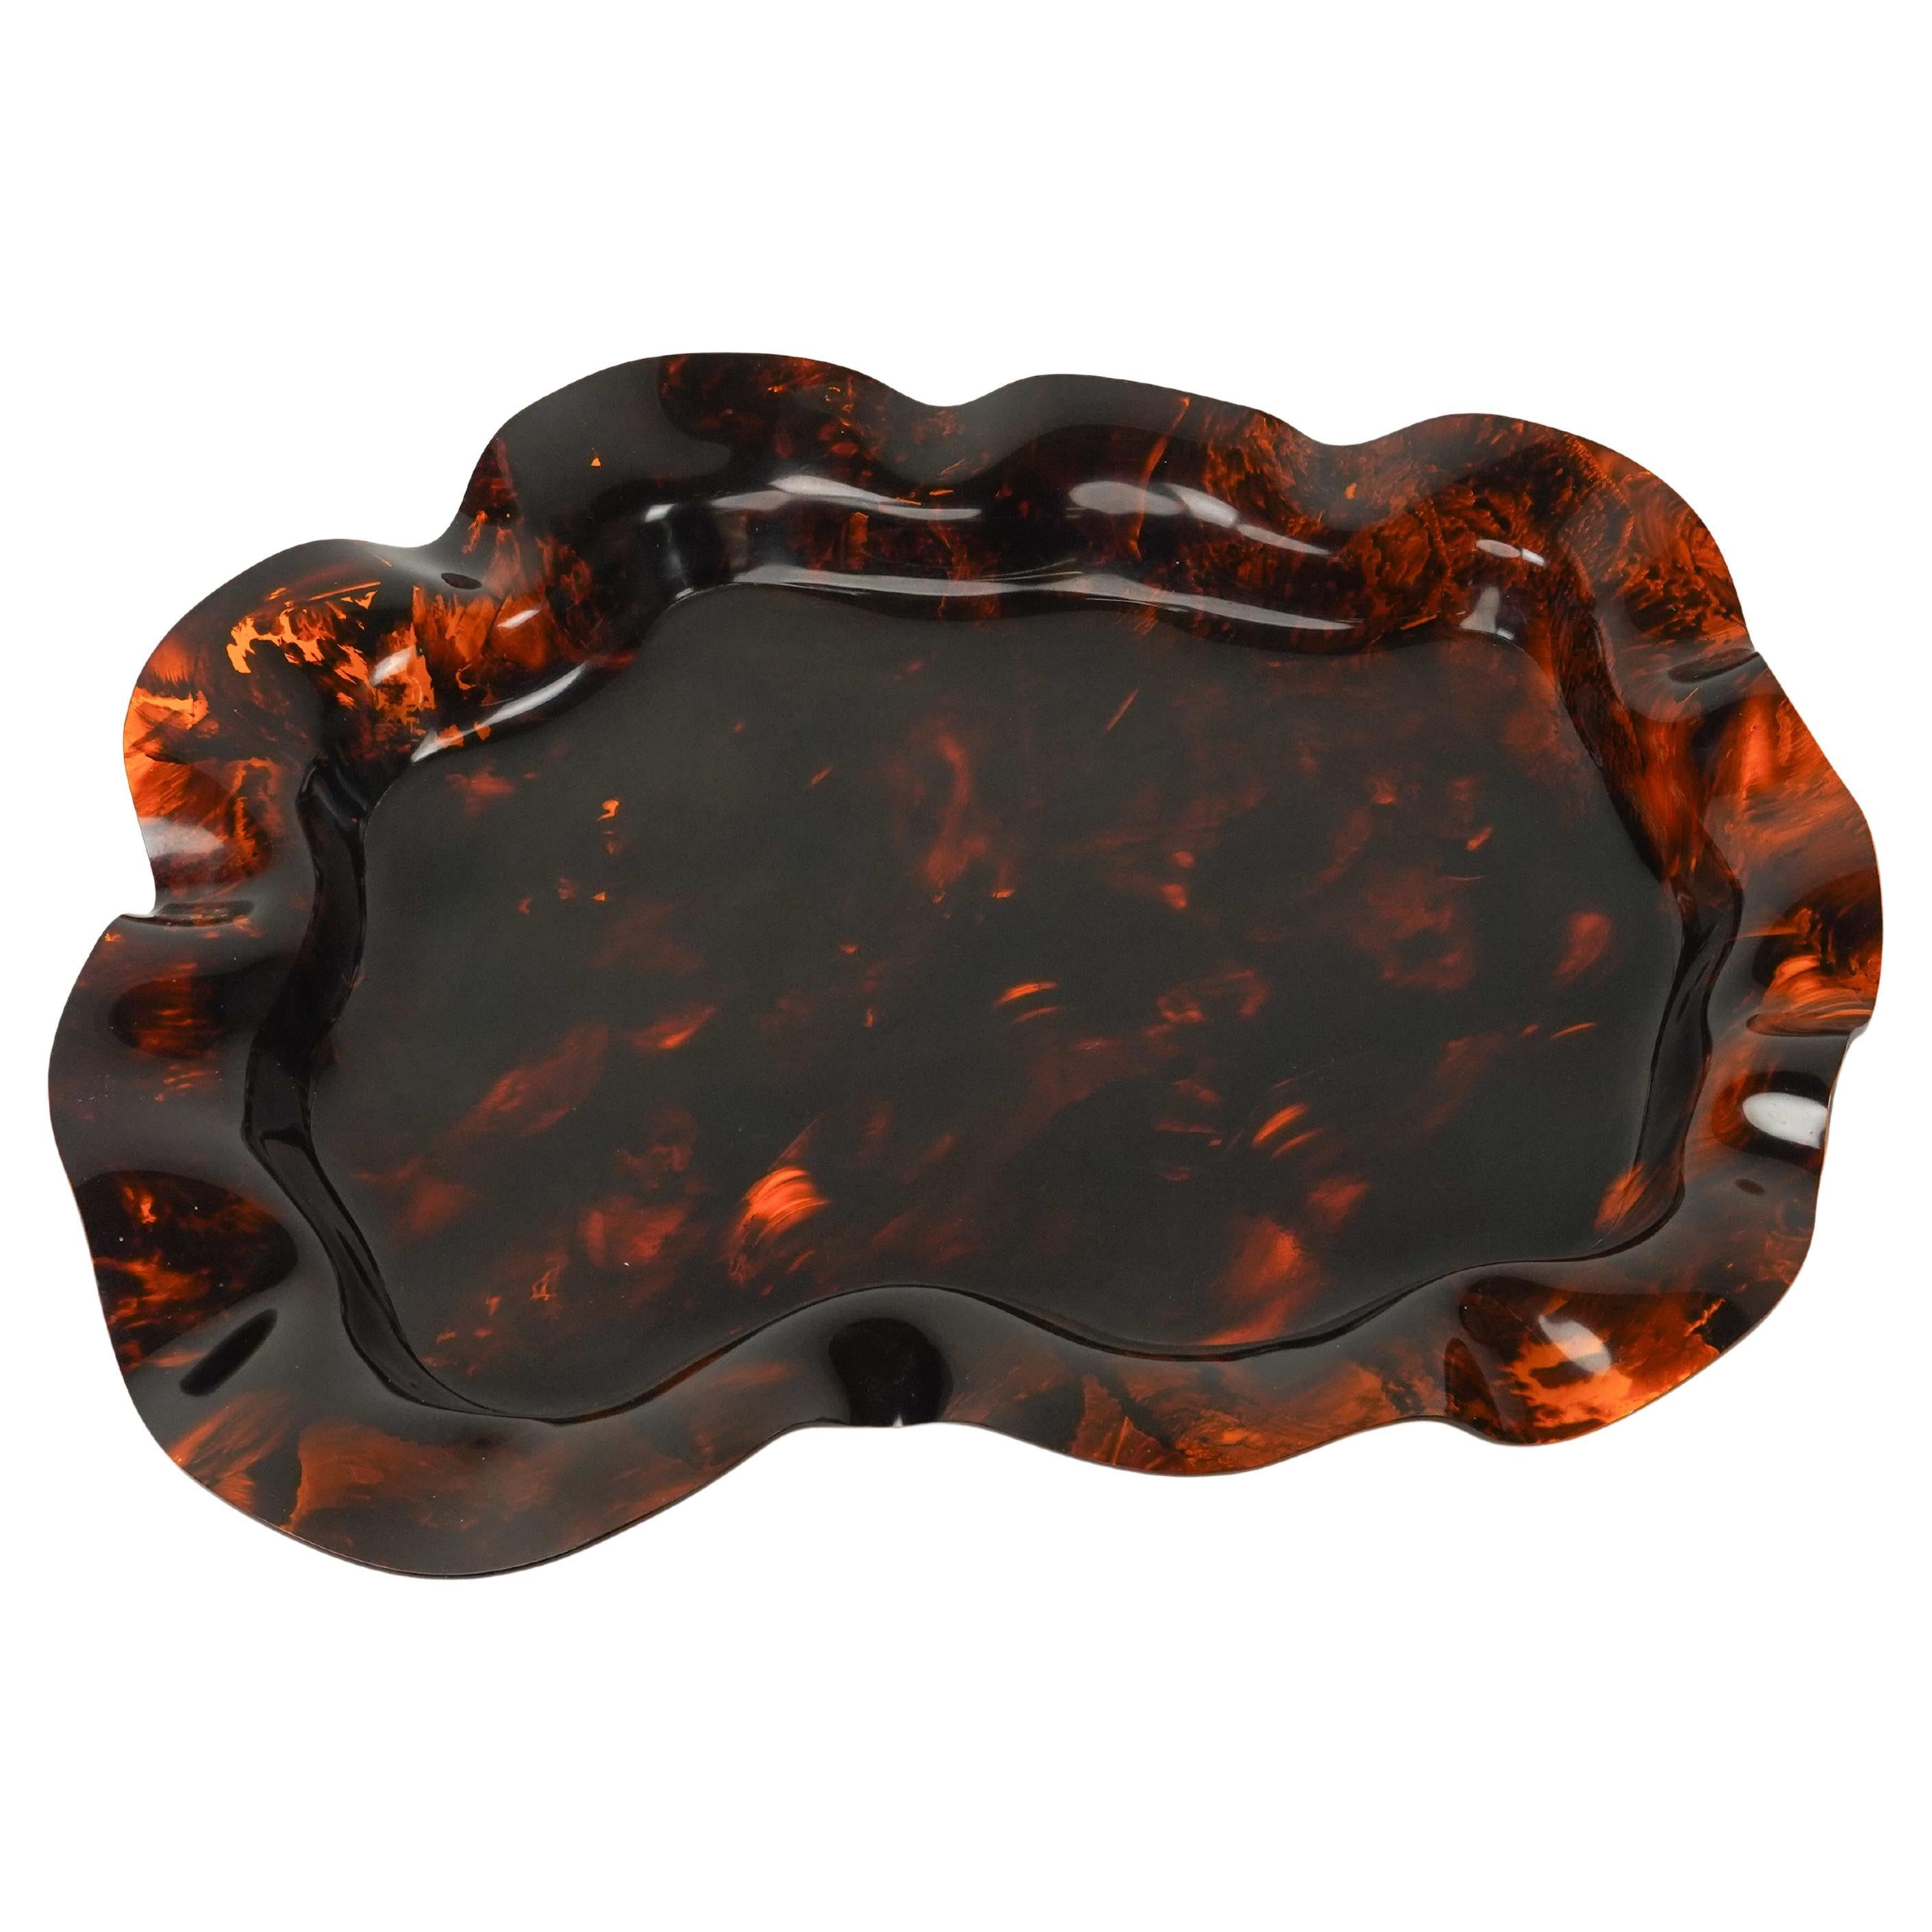 Large Serving Tray or Centerpiece Lucite Faux Tortoiseshell, Italy 1970s